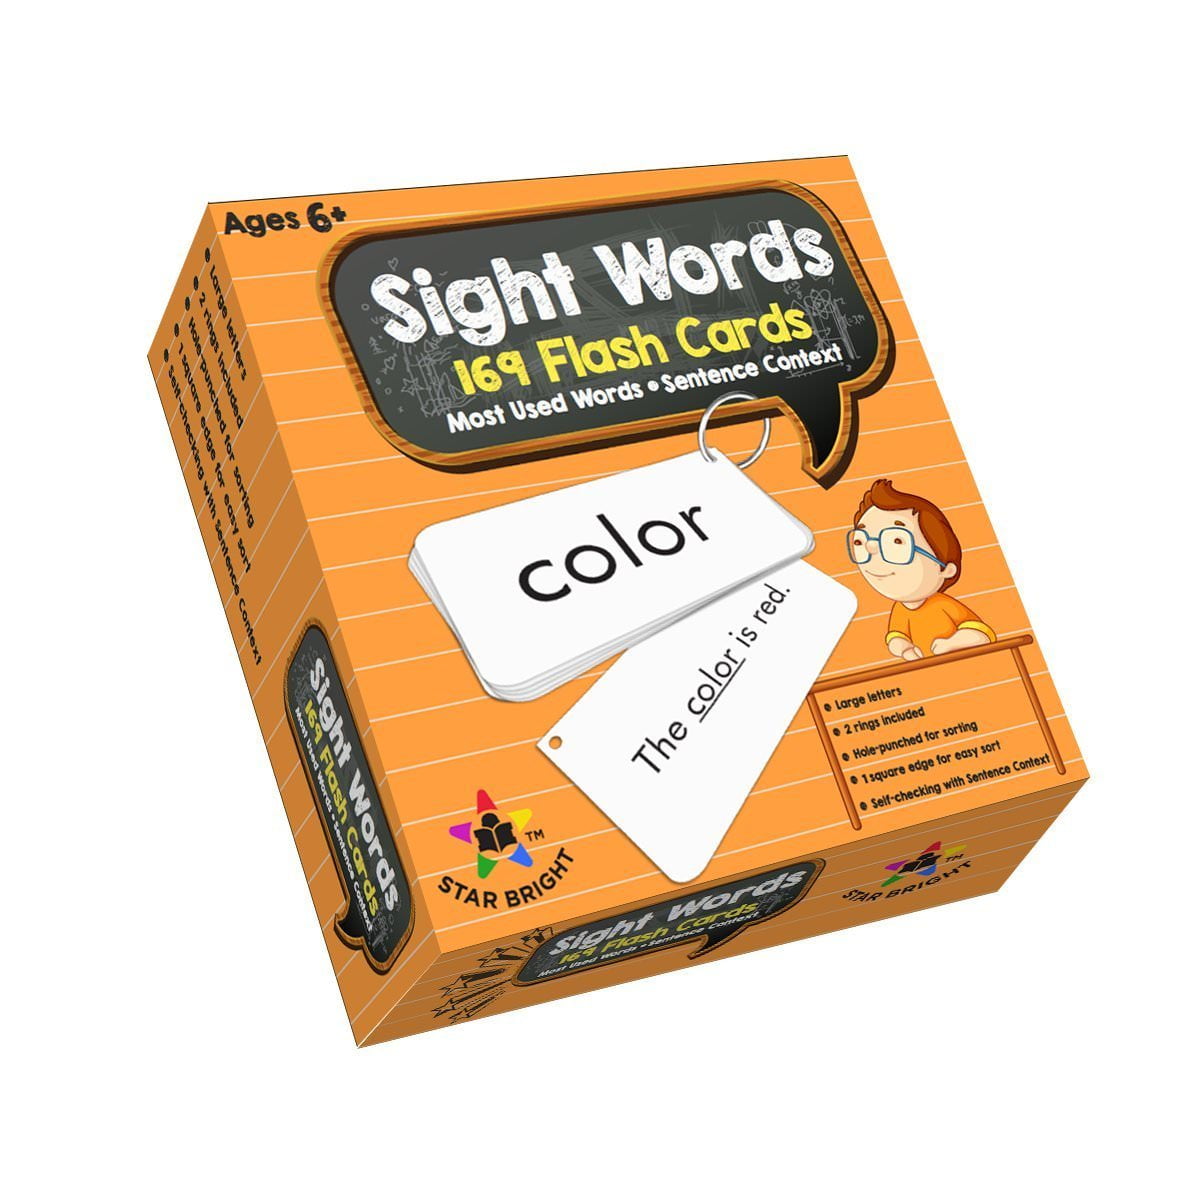 169 Sight Words and Sentences 2 Star Right Education Sight Words Flash Cards